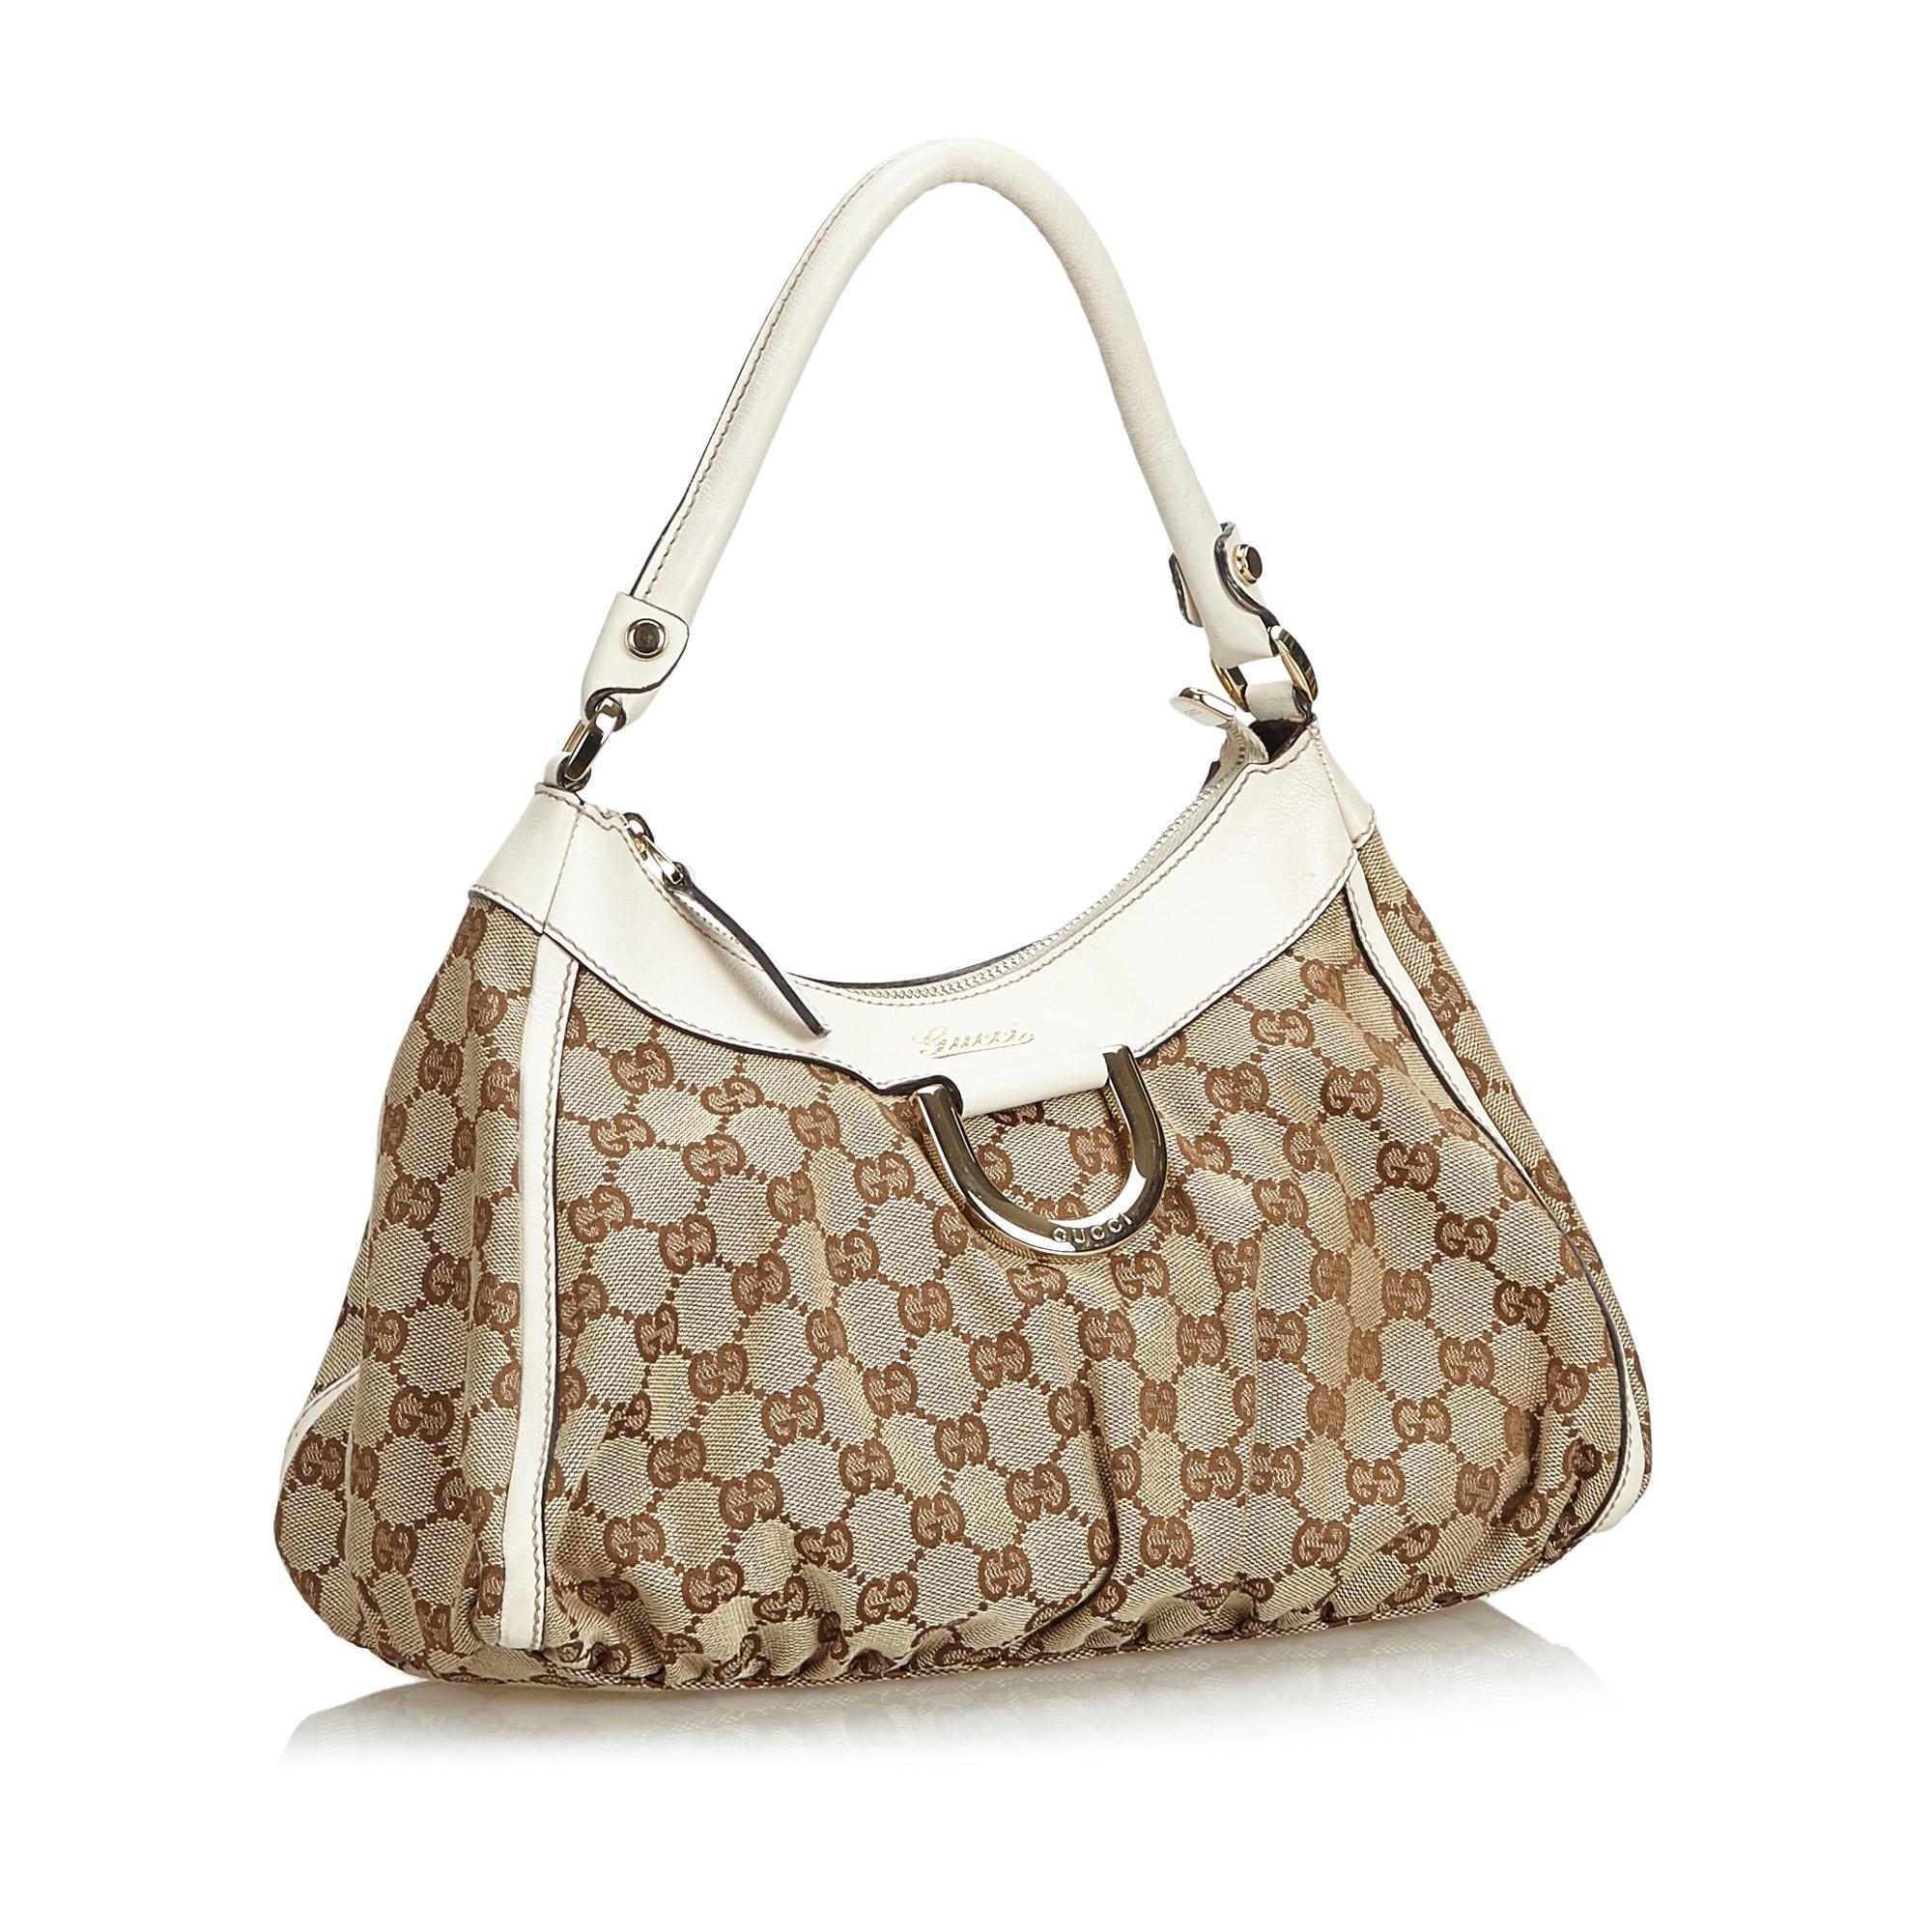 The Abbey D-Ring handbag features a jacquard body with leather trim, a rolled leather handle, a top zip closure, fabric lining, and an interior zip and slip pockets. It carries as B+ condition rating.

Inclusions: 
Dust Bag
Dimensions:
Length: 23.00